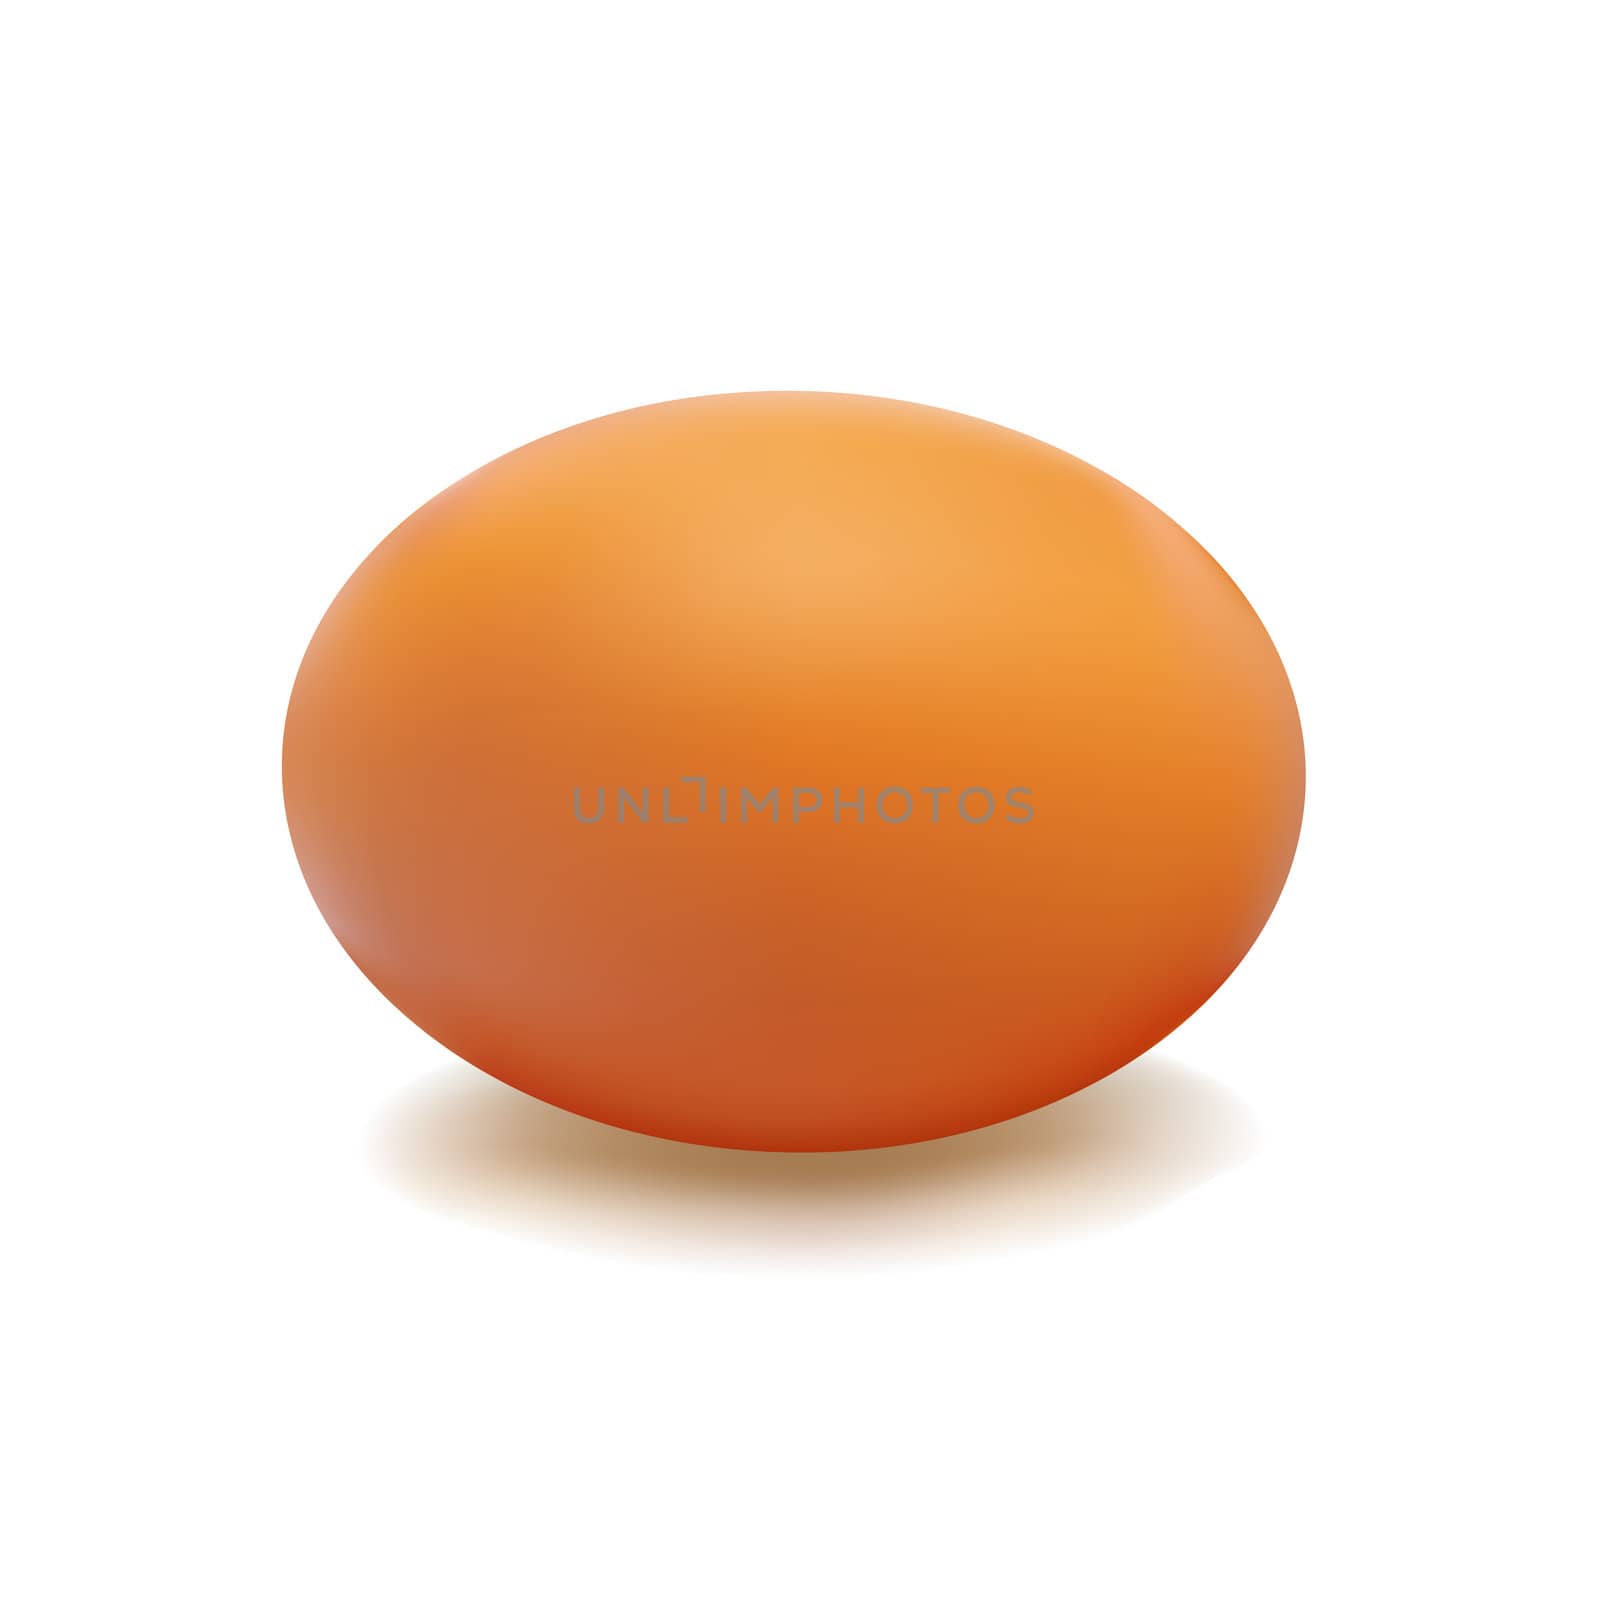 Brown egg with a light shadow on white background